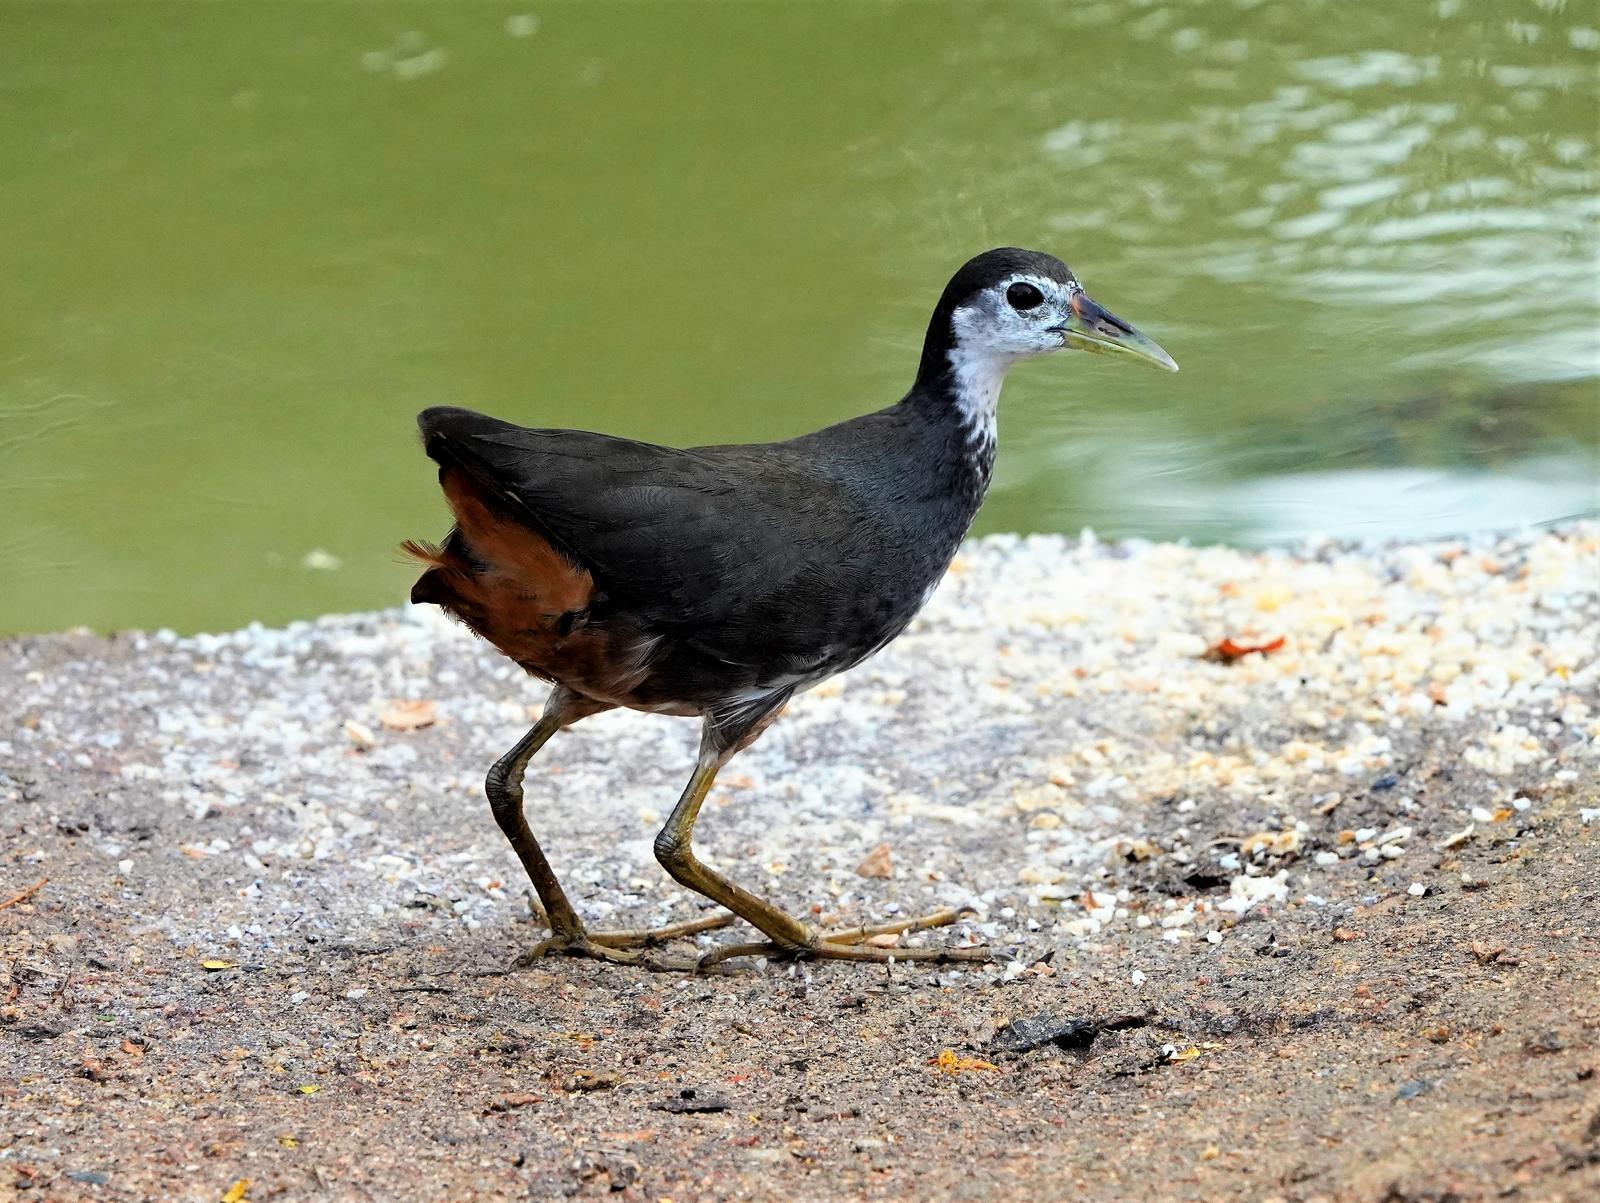 White-breasted Waterhen Photo by Steven Cheong